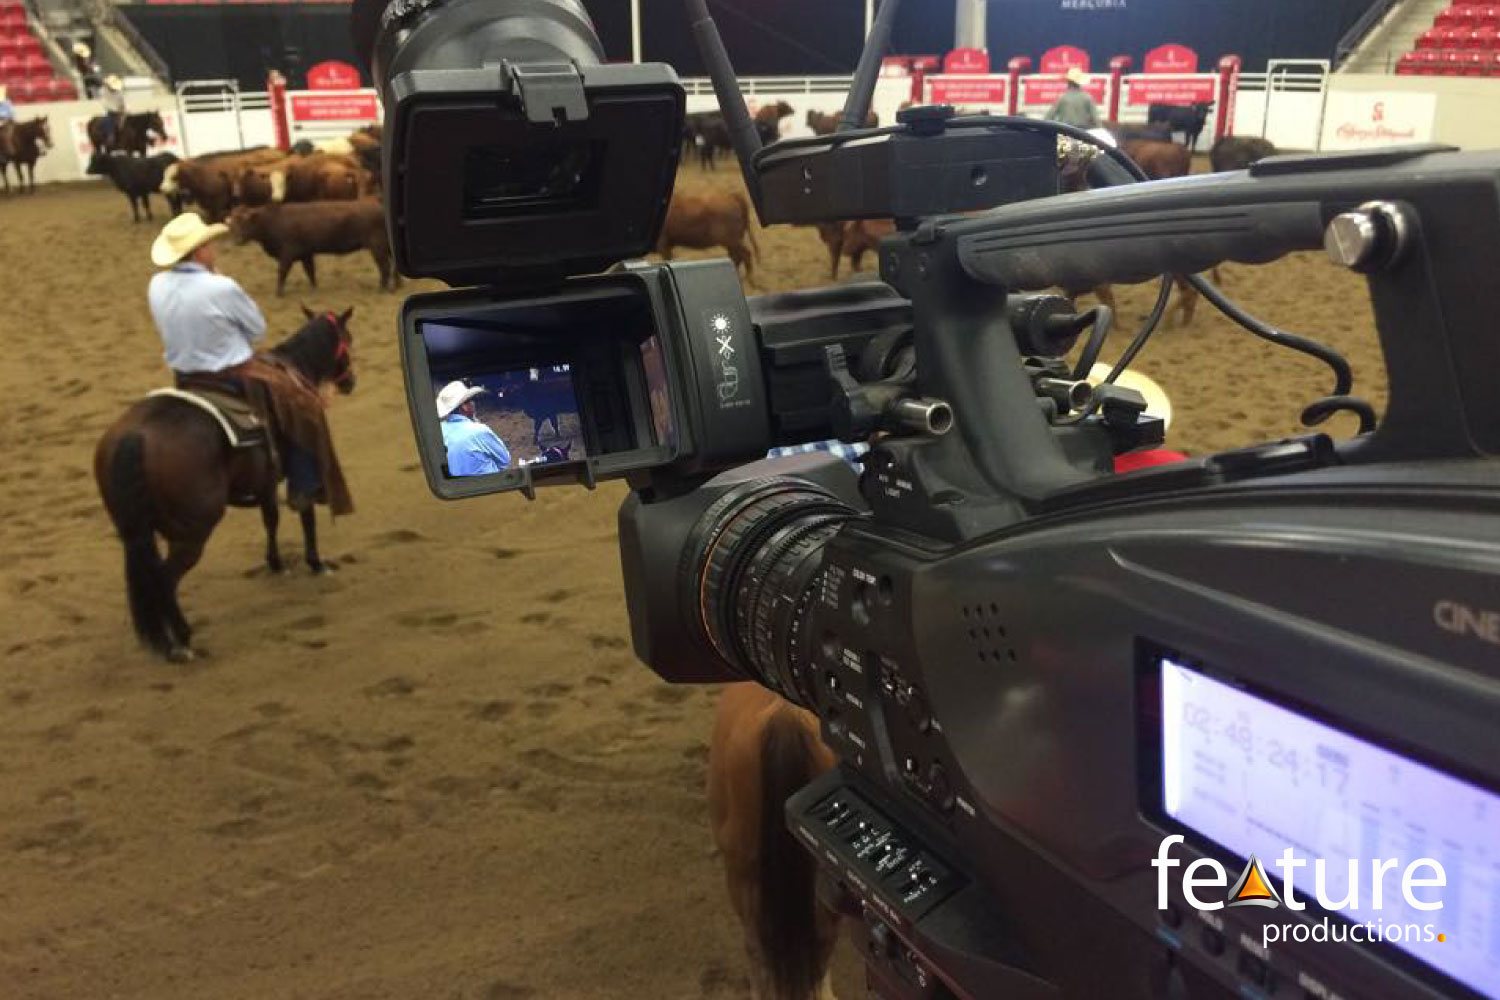 CALGARY STAMPEDE VIDEO PRODUCTION